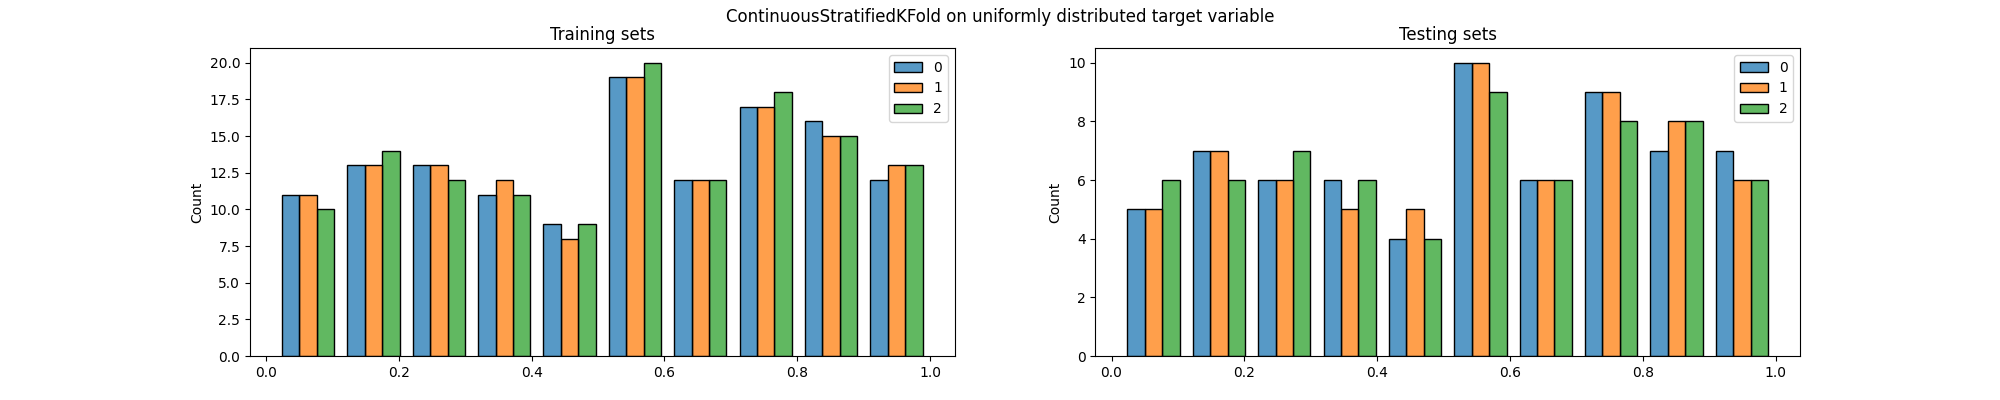 ContinuousStratifiedKFold on uniformly distributed target variable, Training sets, Testing sets